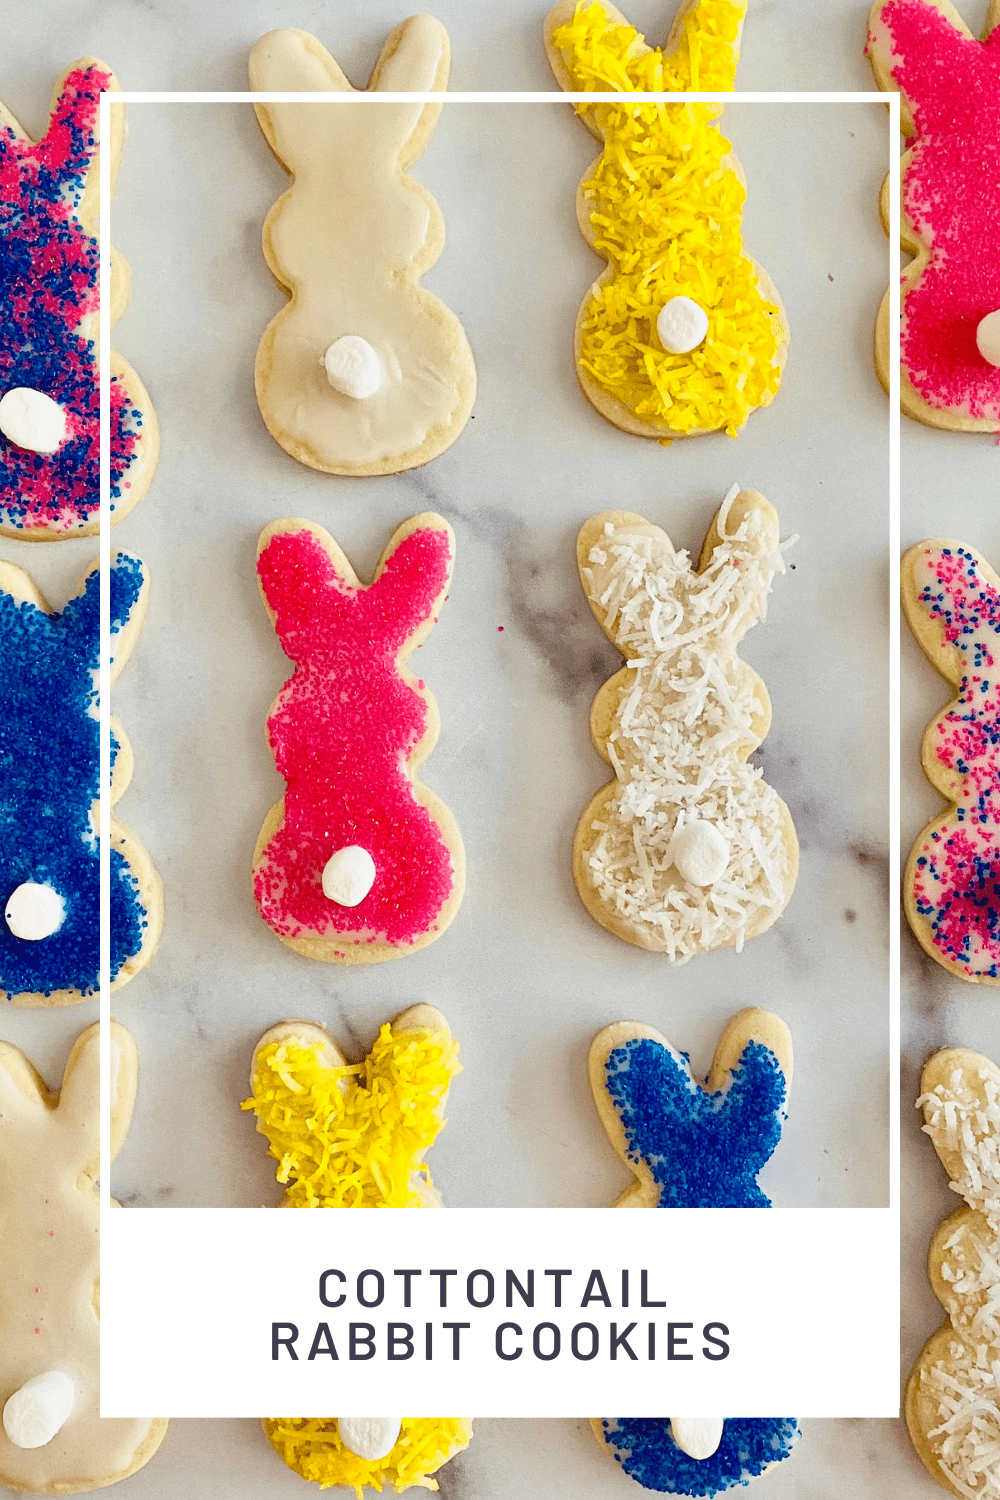 Bunny shaped sugar cookies with marshmallow tails and decorated with colored sugar and coconut.